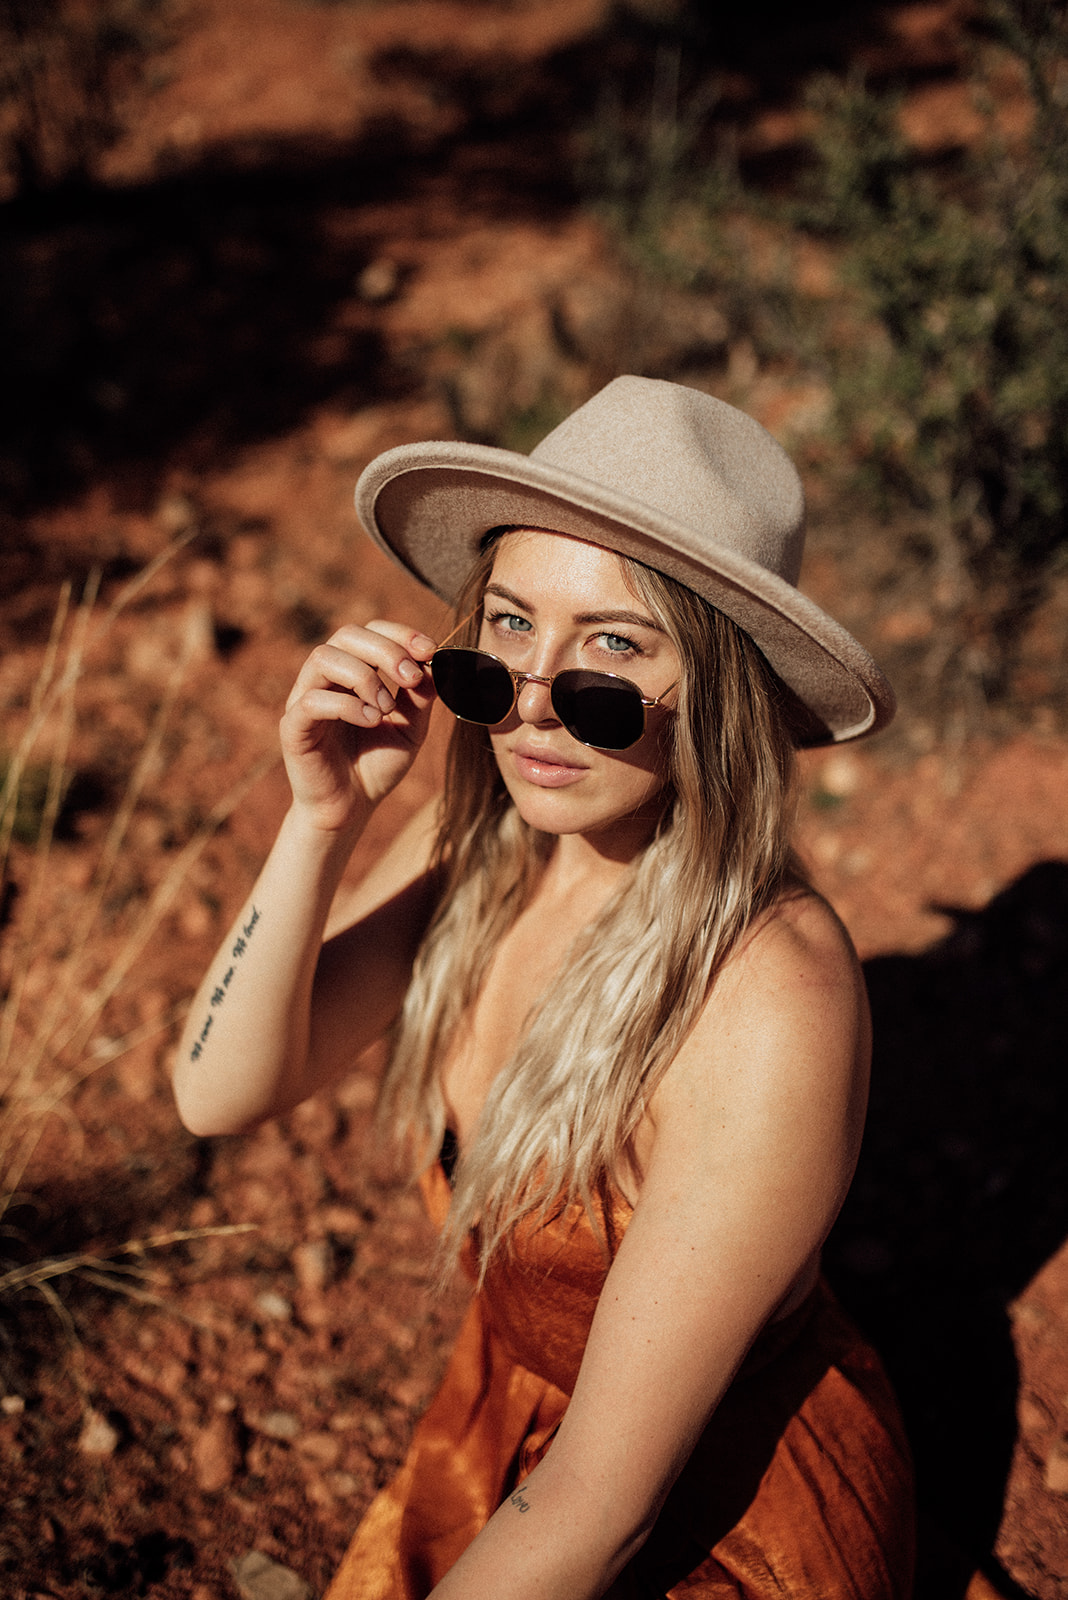 girl with sunglasses and hat in an orange dress in Sedona